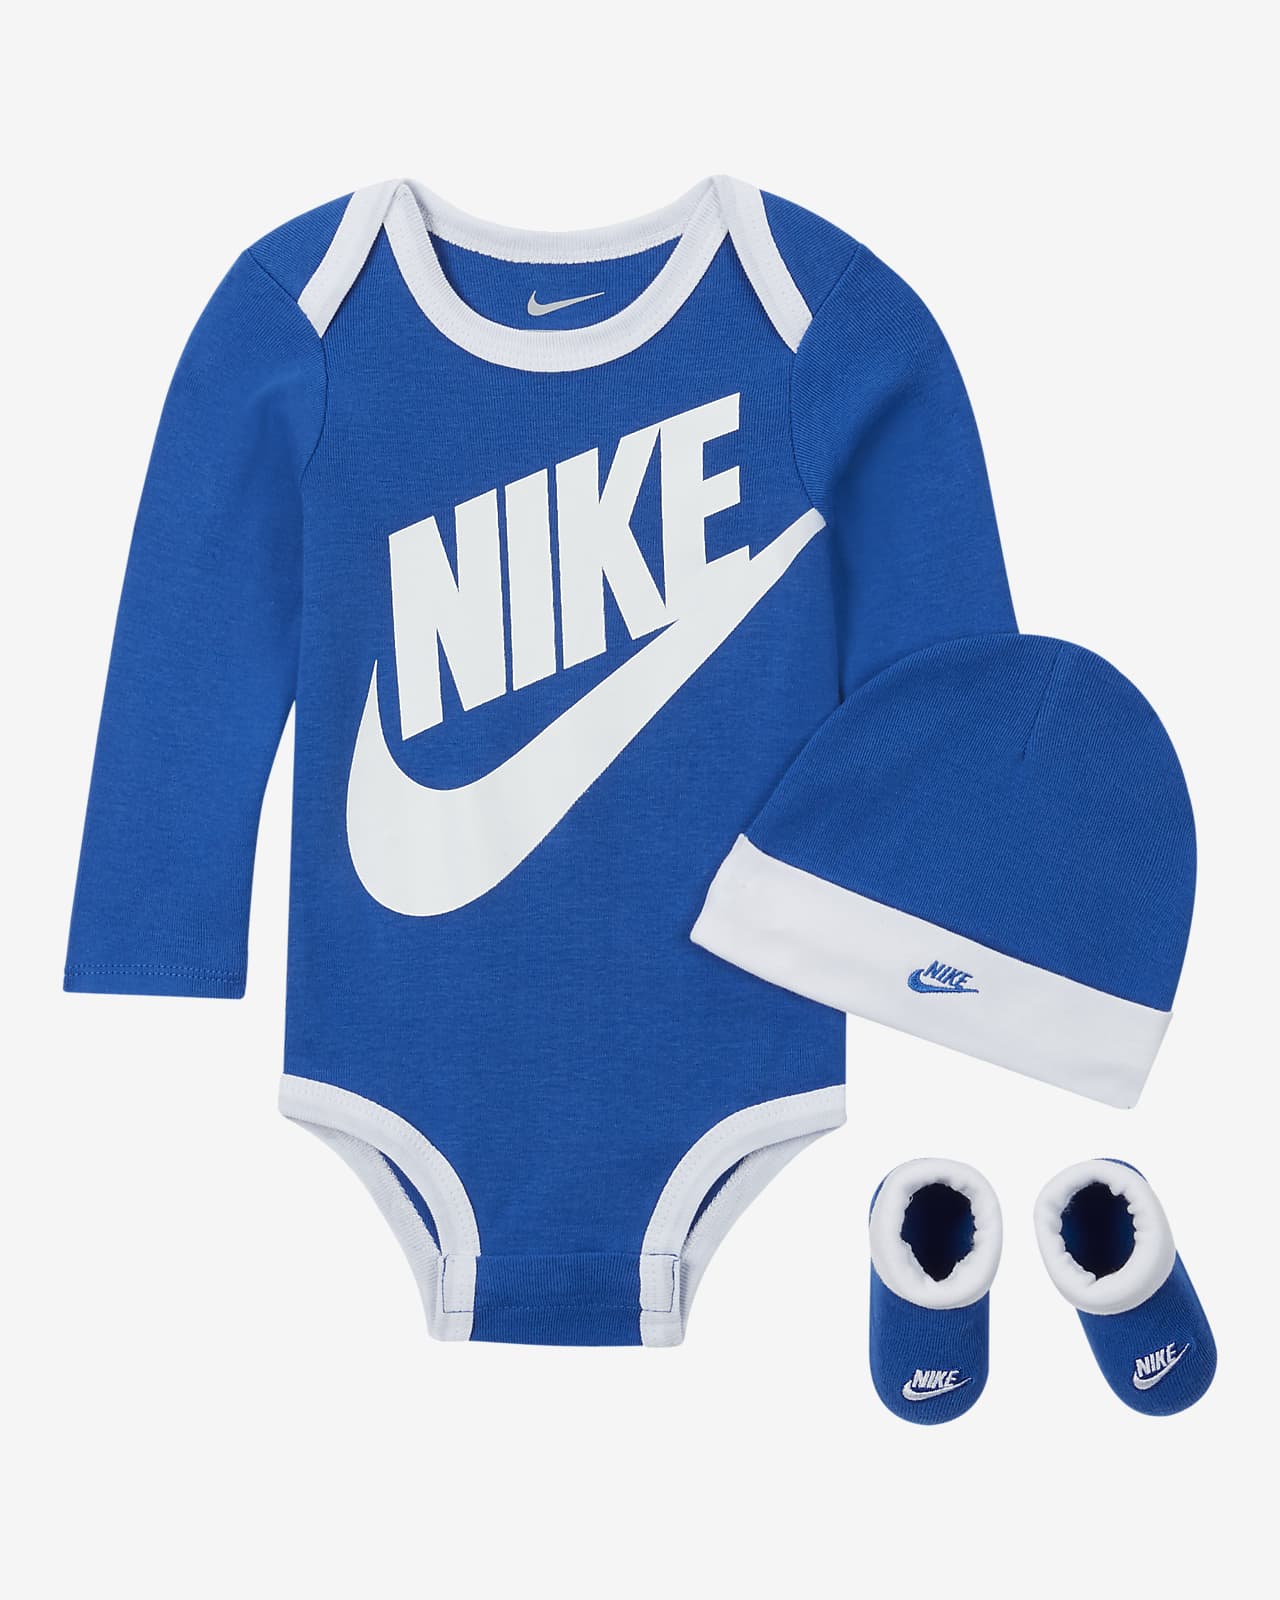 Nike Baby (6-12M) Bodysuit, Hat and 